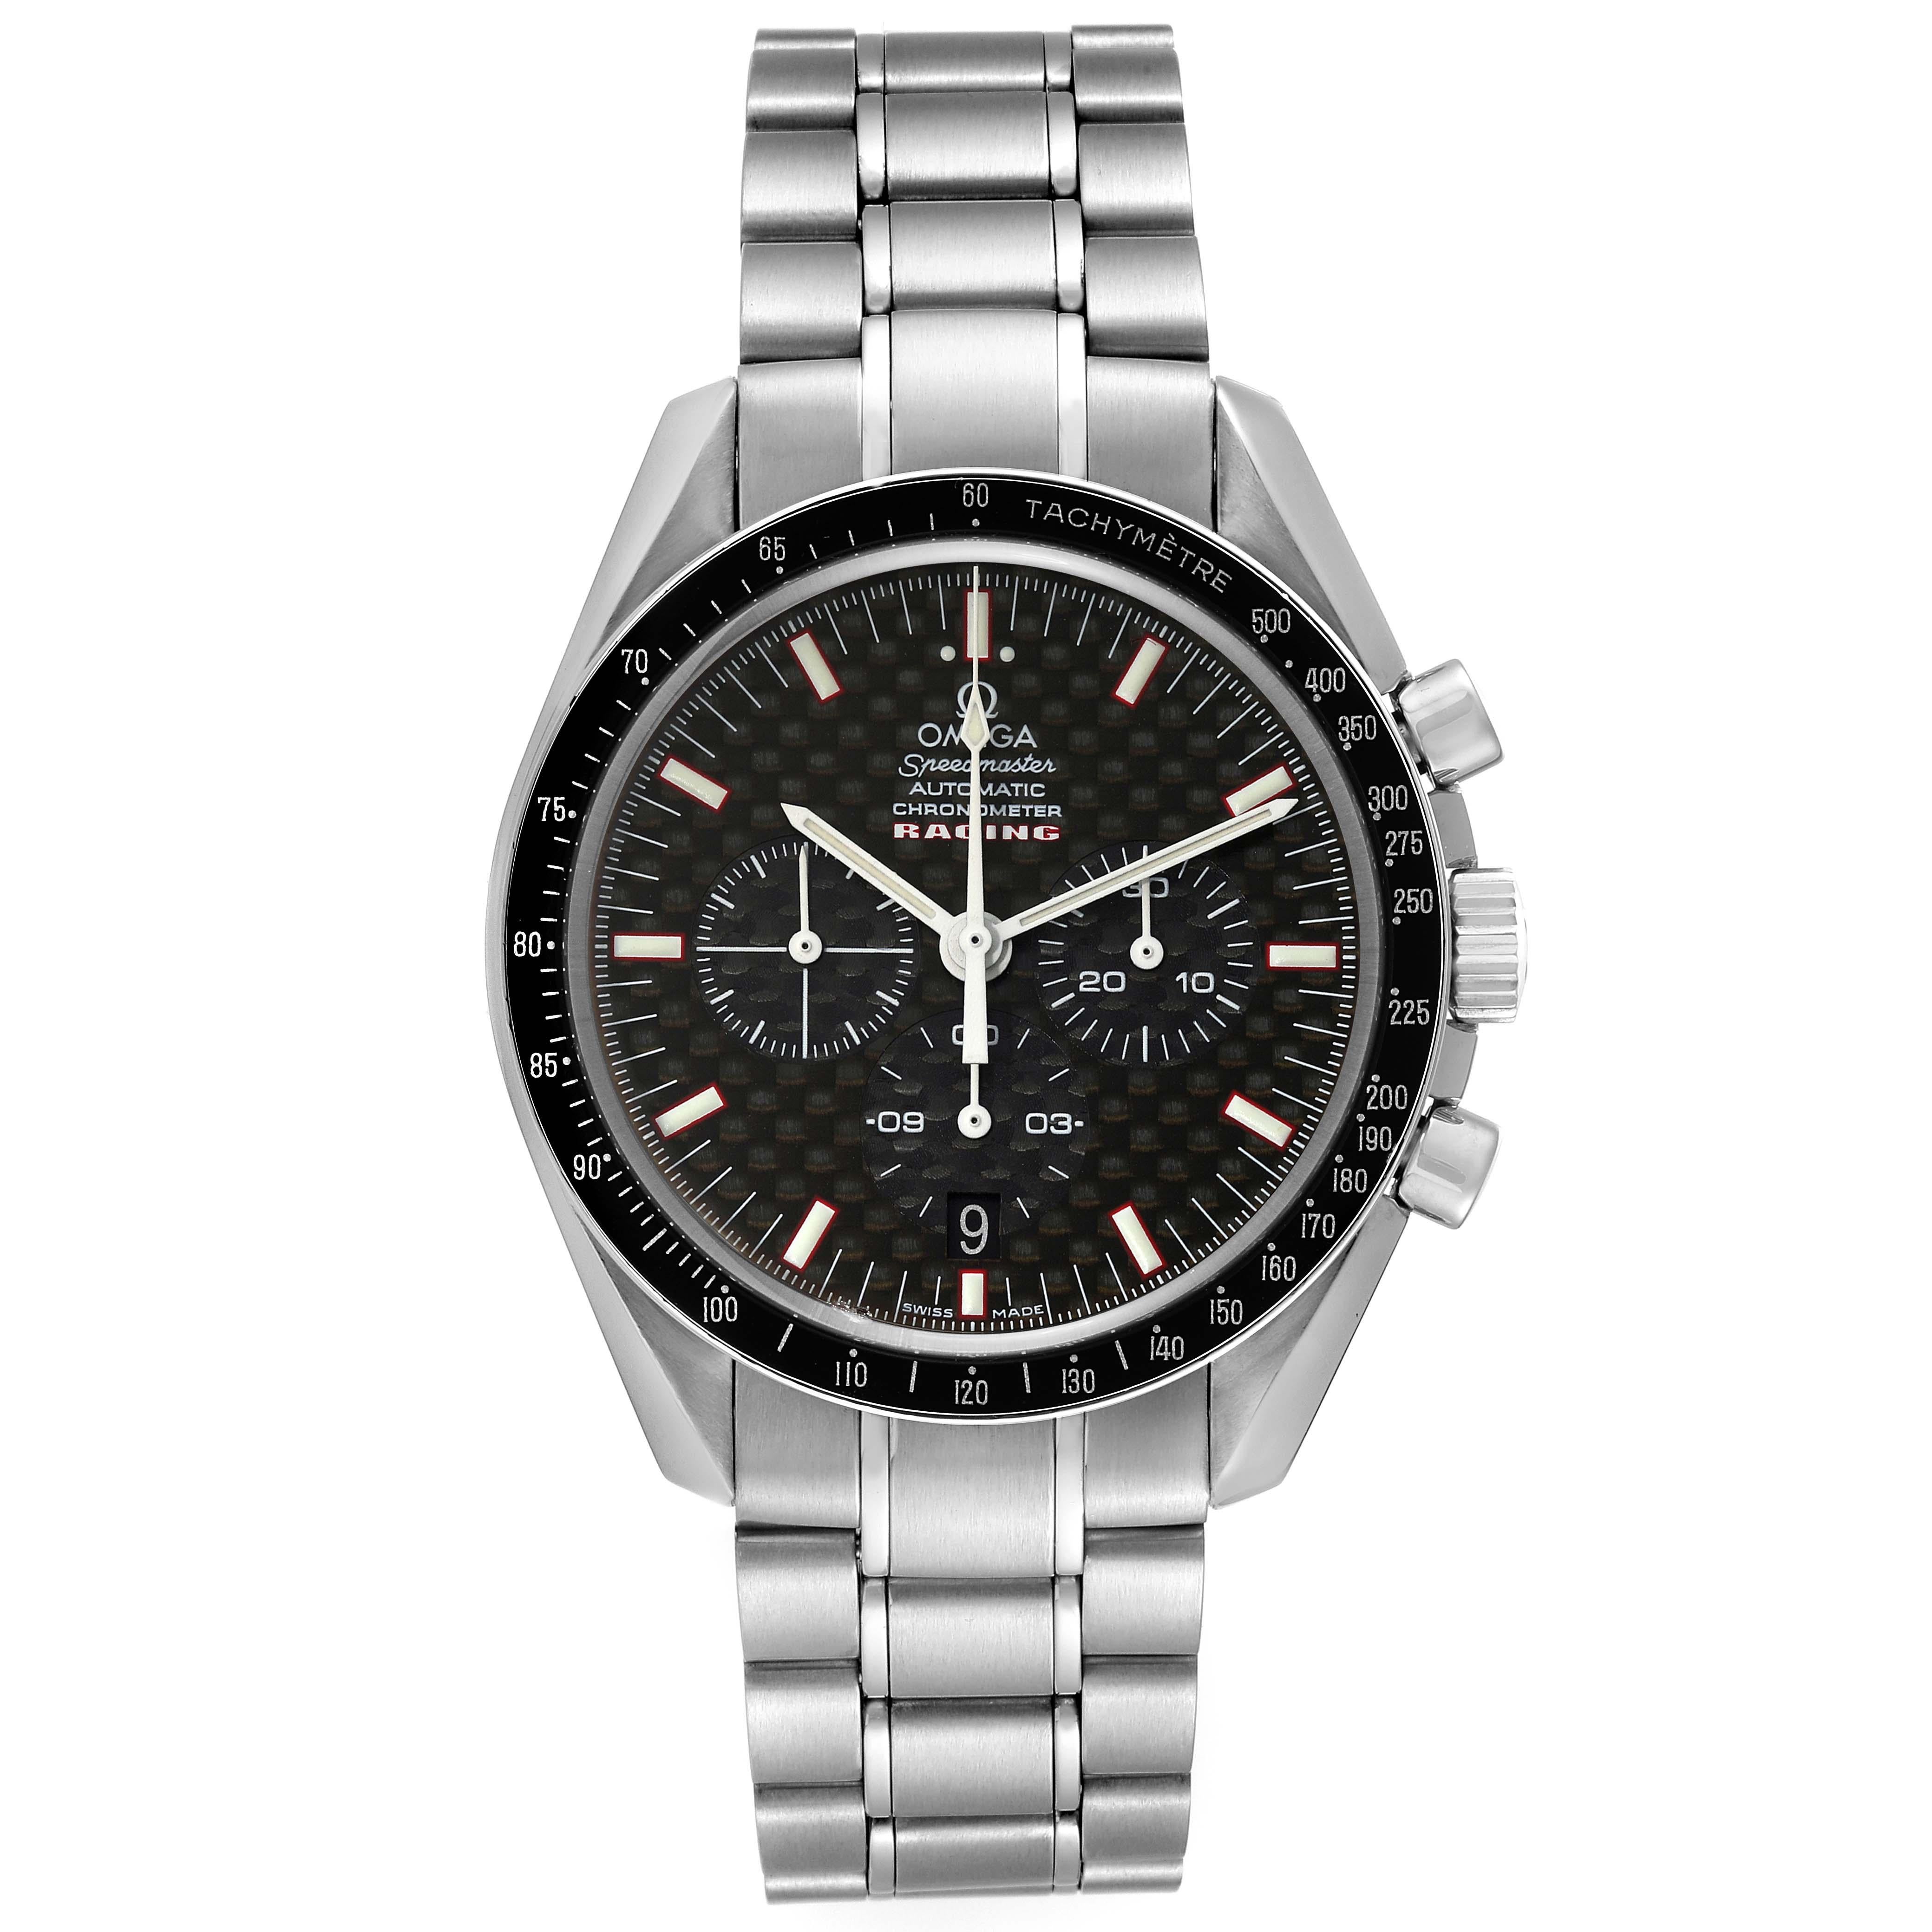 Omega Speedmaster Professional Racing Steel Mens Watch 3552.59.00 Box Card. Automatic self-winding chronograph movement. Stainless steel round case 42.0 mm in diameter. Black bezel with tachymeter function. Scratch resistant sapphire crystal